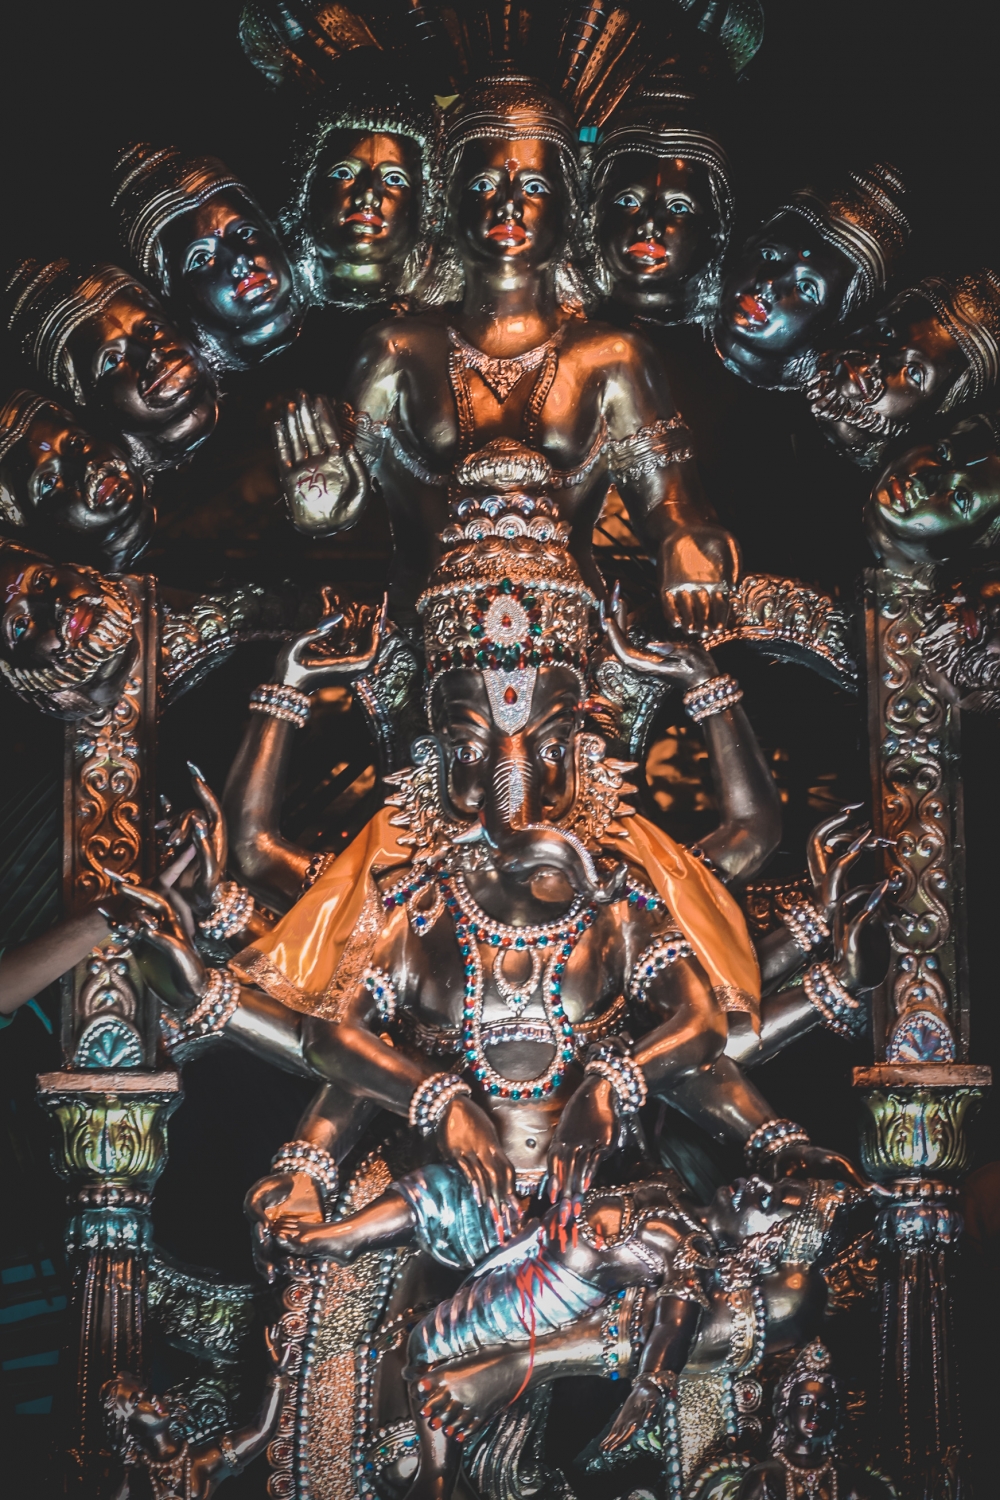 Ganpati bapa, #photo #photos #pic #pics #envywear #picture #pictures #snapshot #art #beautiful #instagood #picoftheday #photooftheday #color #all_shots #exposure #composition #focus #capture #moment #hdr #hdrspotters #hdrstyles_gf #hdri #hdroftheday #hdriphonegraphy #hdr_lovers #awesome_hdr⠀